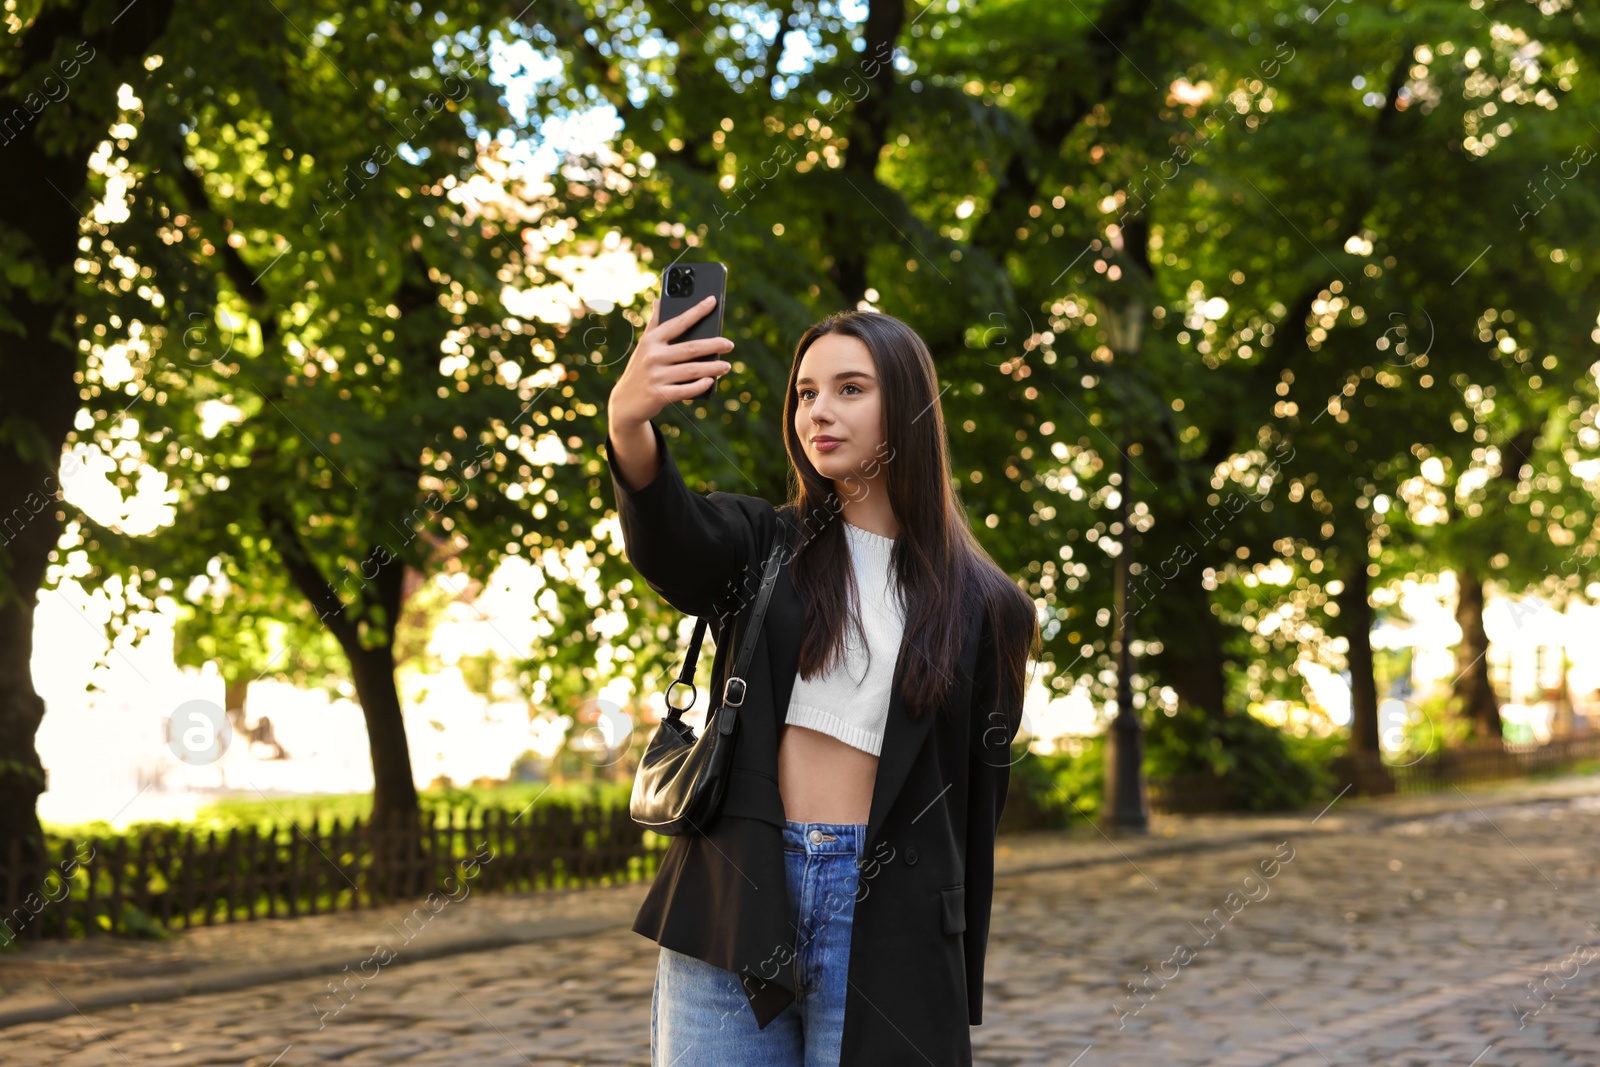 Photo of Travel blogger takIng selfie with smartphone outdoors